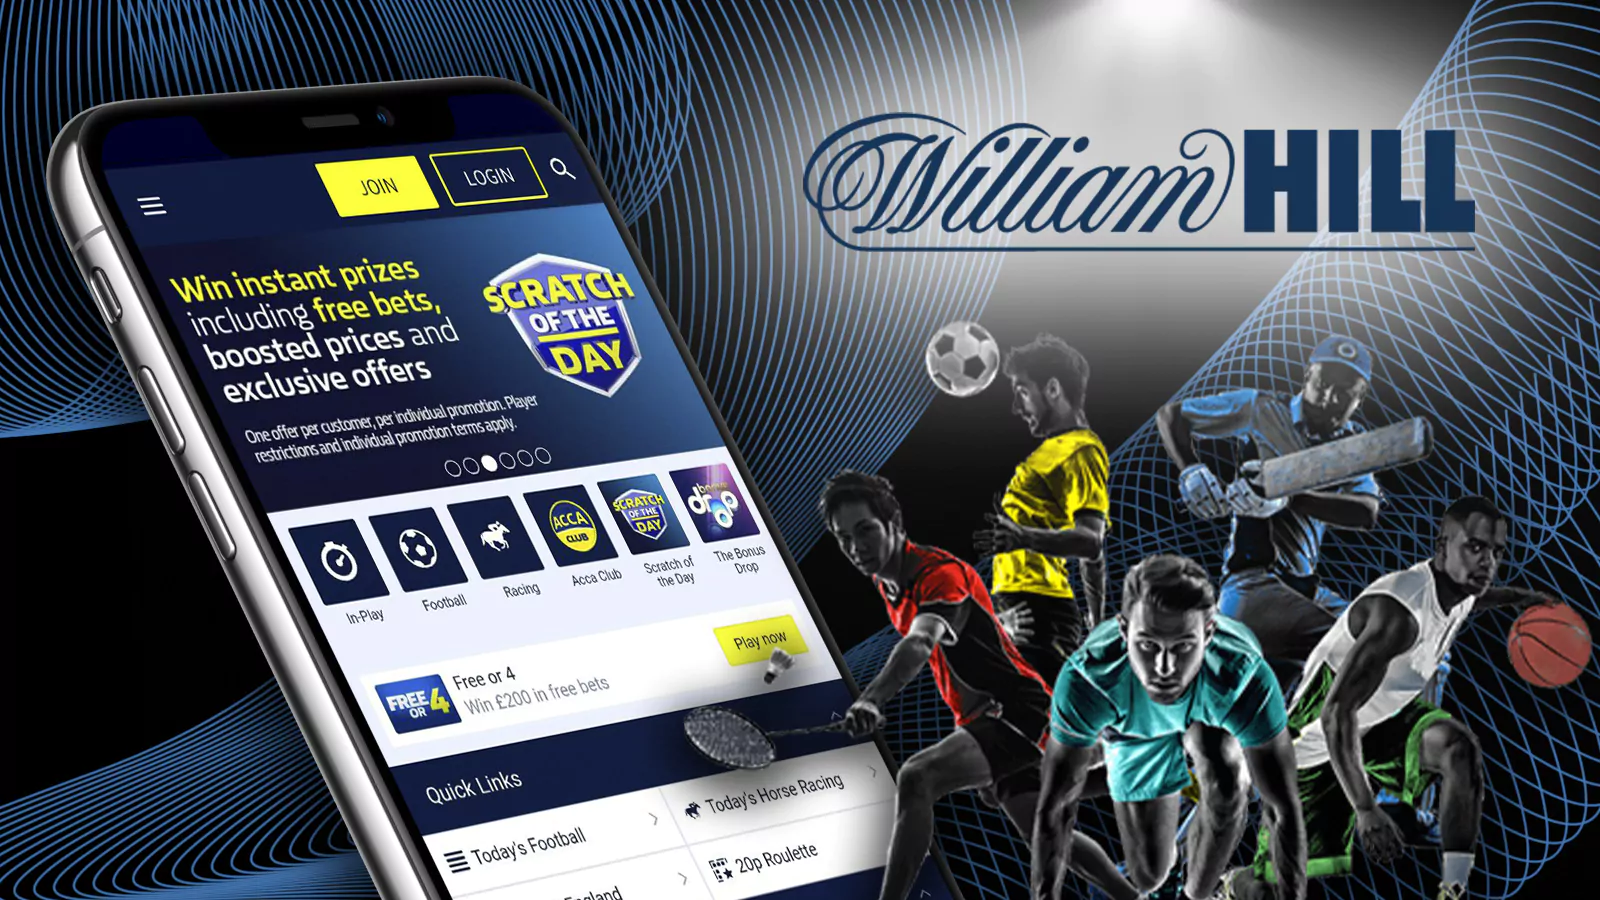 William Hill has a good, easy-to-use app, and they have constant updates and some of the best promotions.